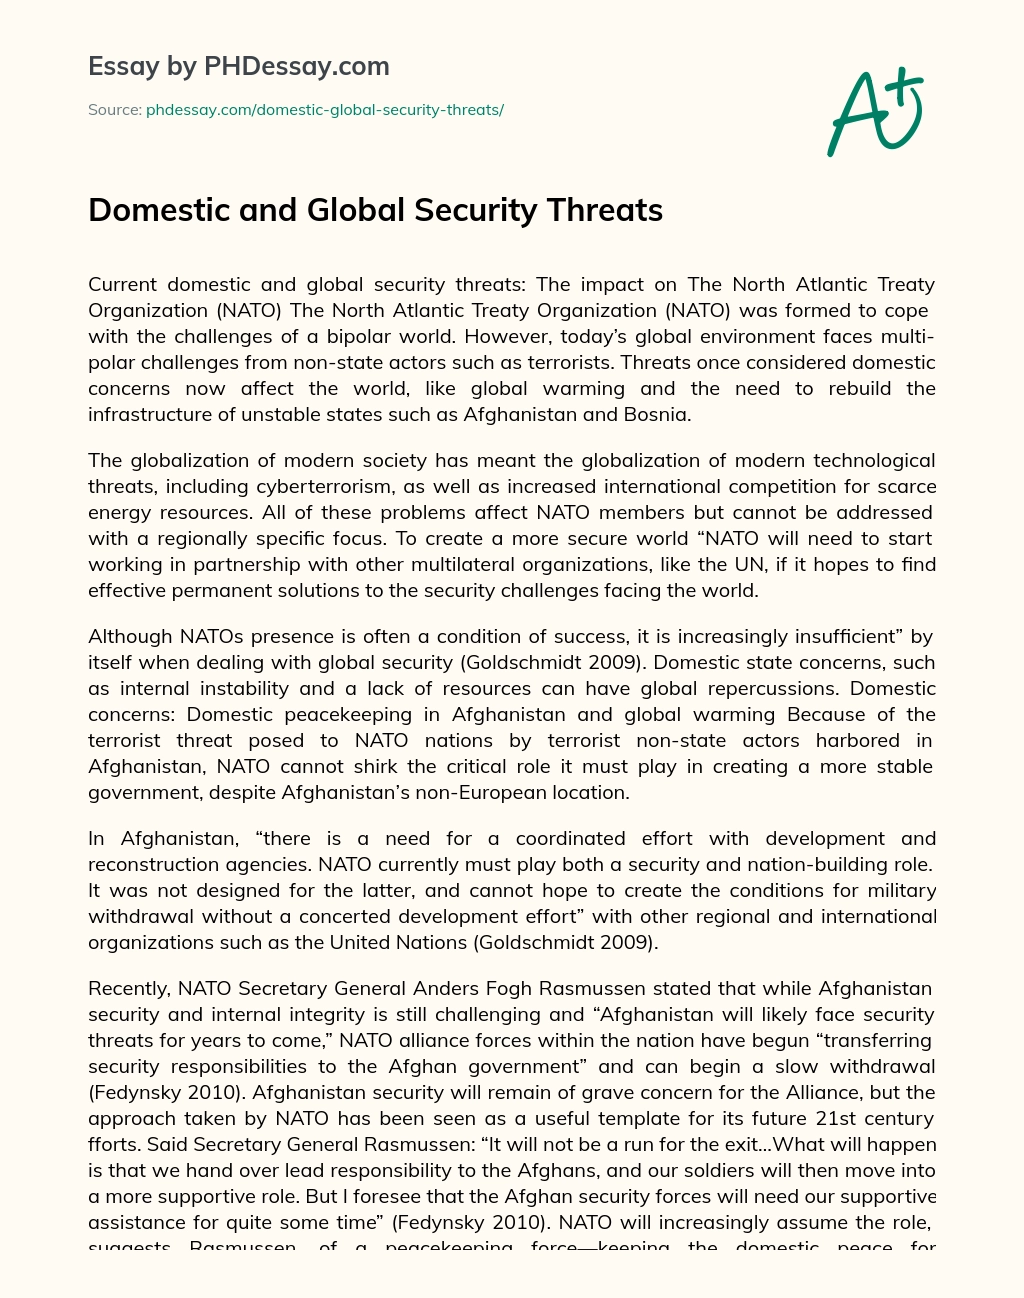 Domestic and Global Security Threats essay